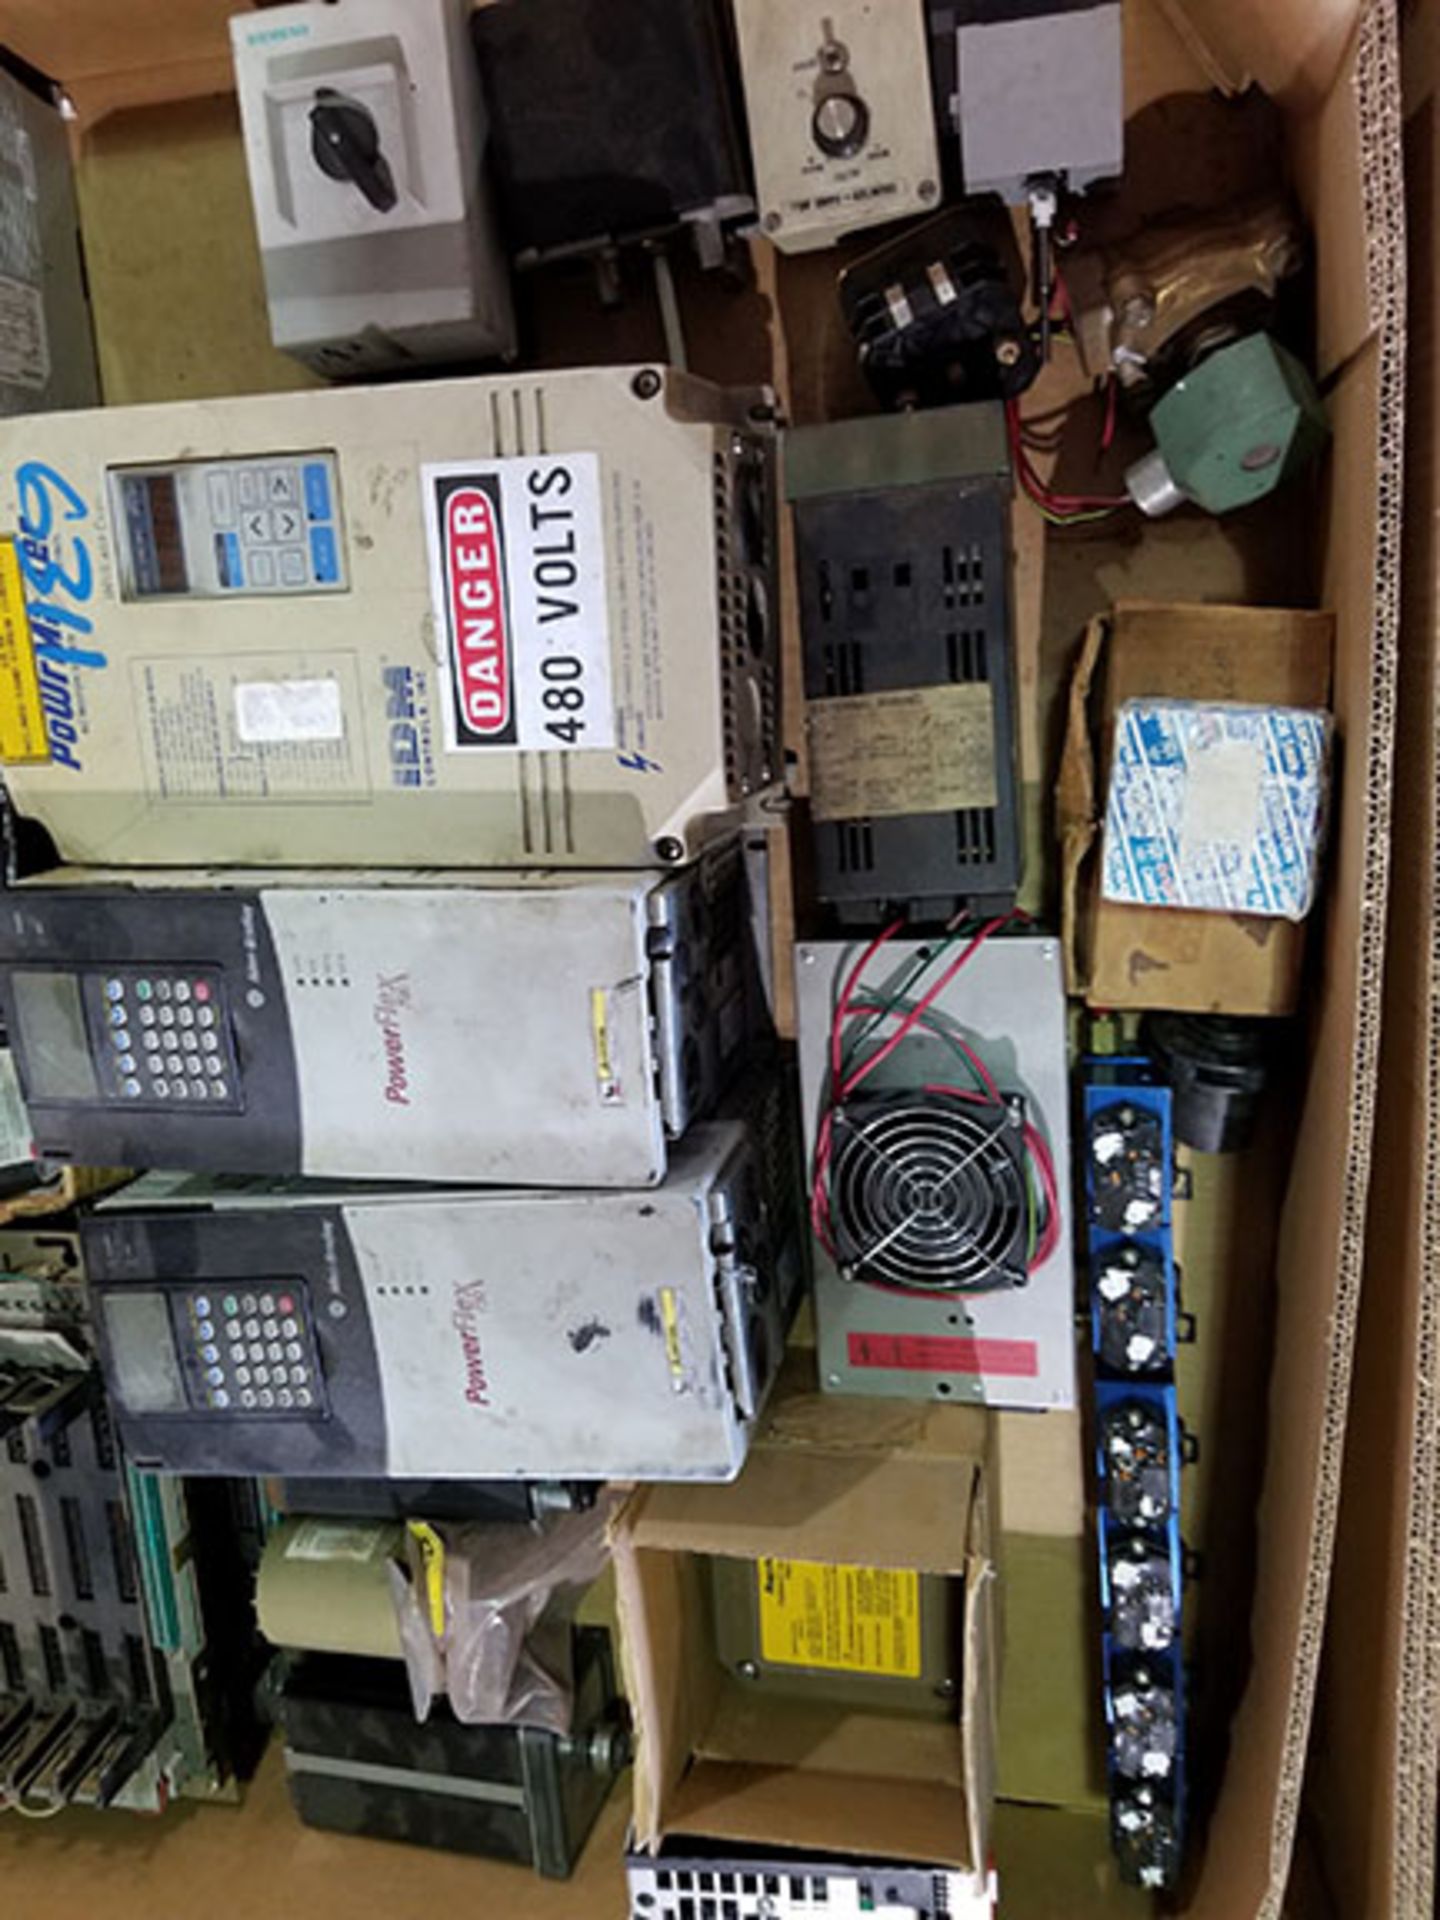 PALLET OF (2) AB POWERFLEX 700 VFD, AC MOTOR CONTROL, AND ASSORTED CONTROL ITEMS - Image 4 of 4